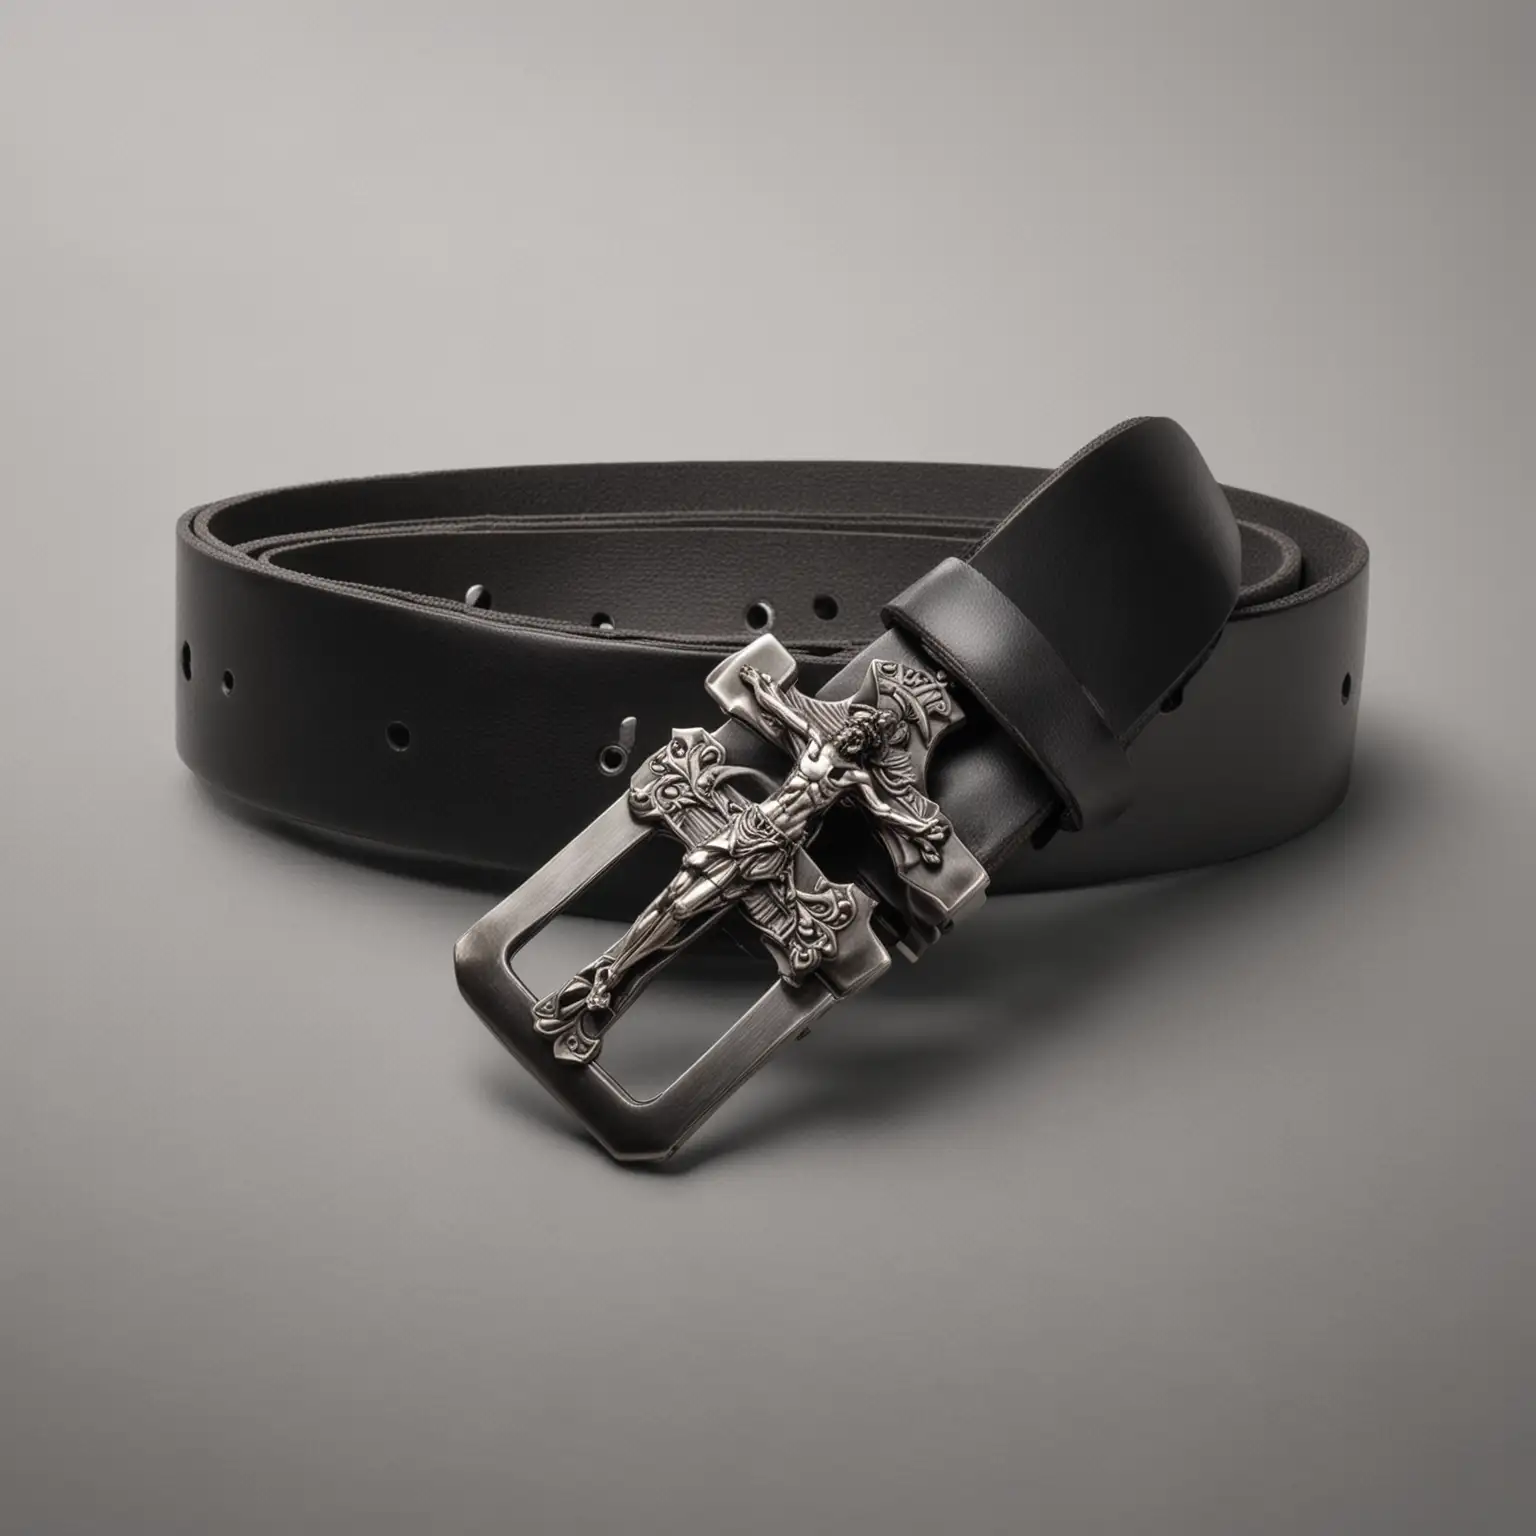 Black Leather Belt with Crucifix Buckle on White Background